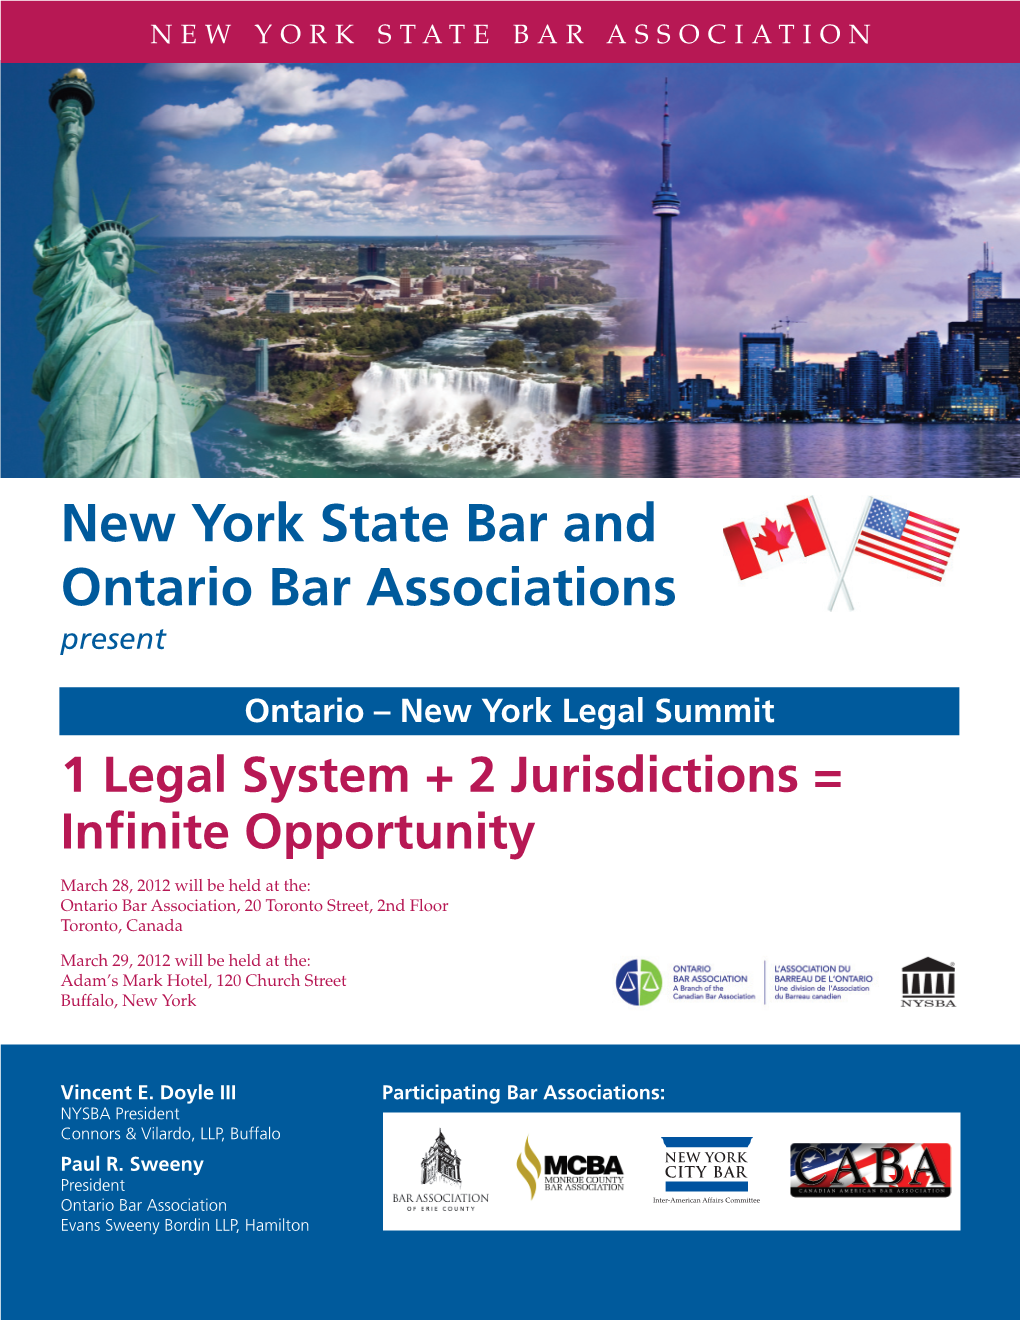 New York State Bar and Ontario Bar Associations Present